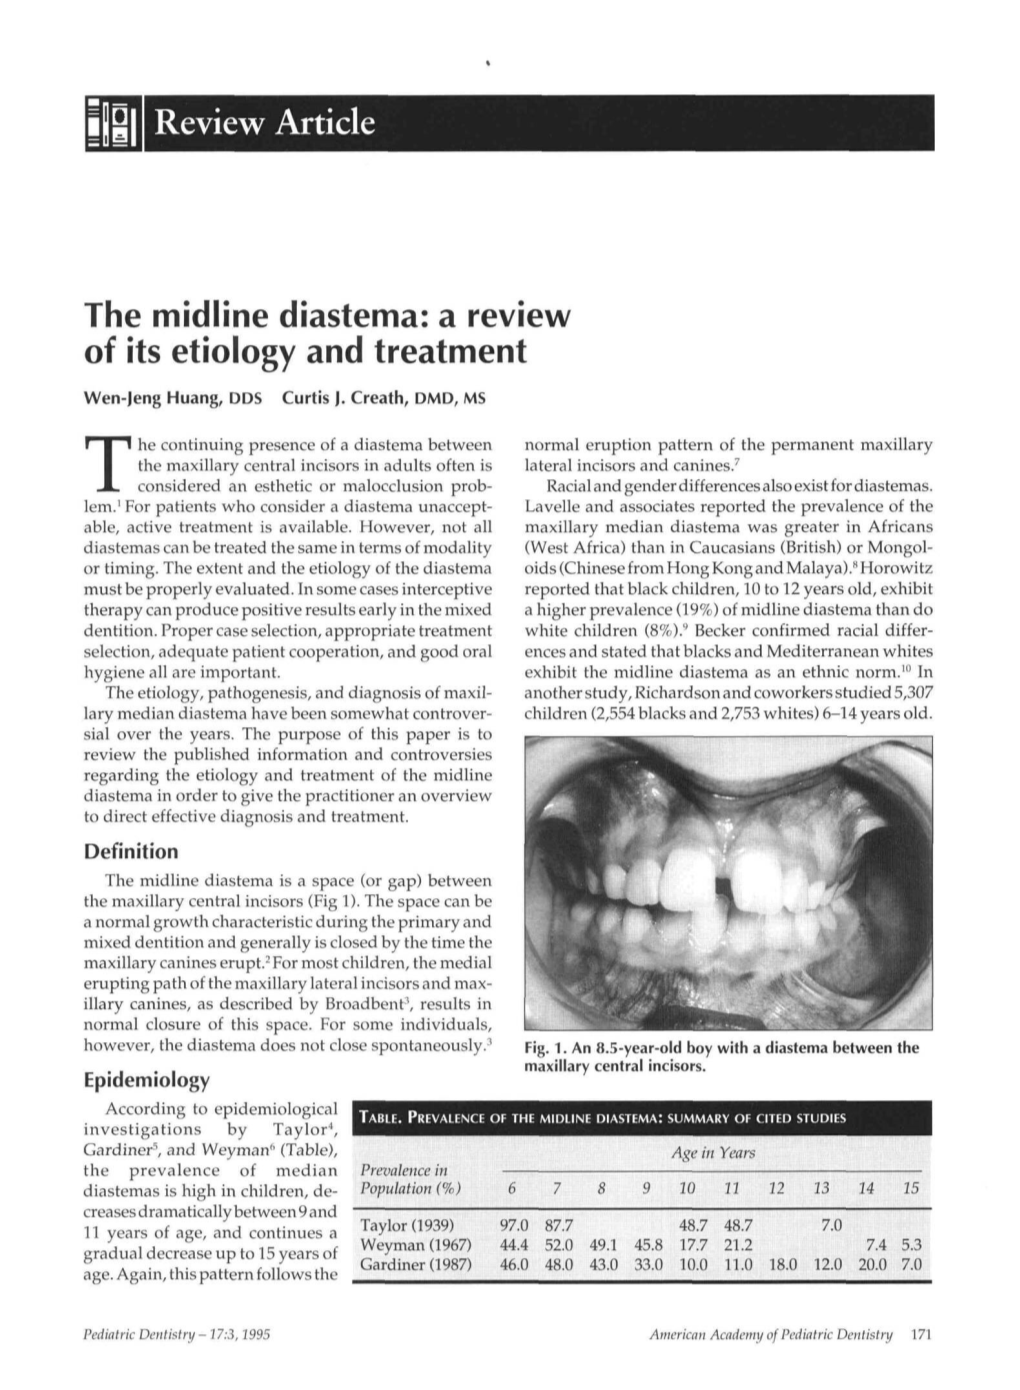 The Midline Diastema: a Review of Its Etiology and Treatment